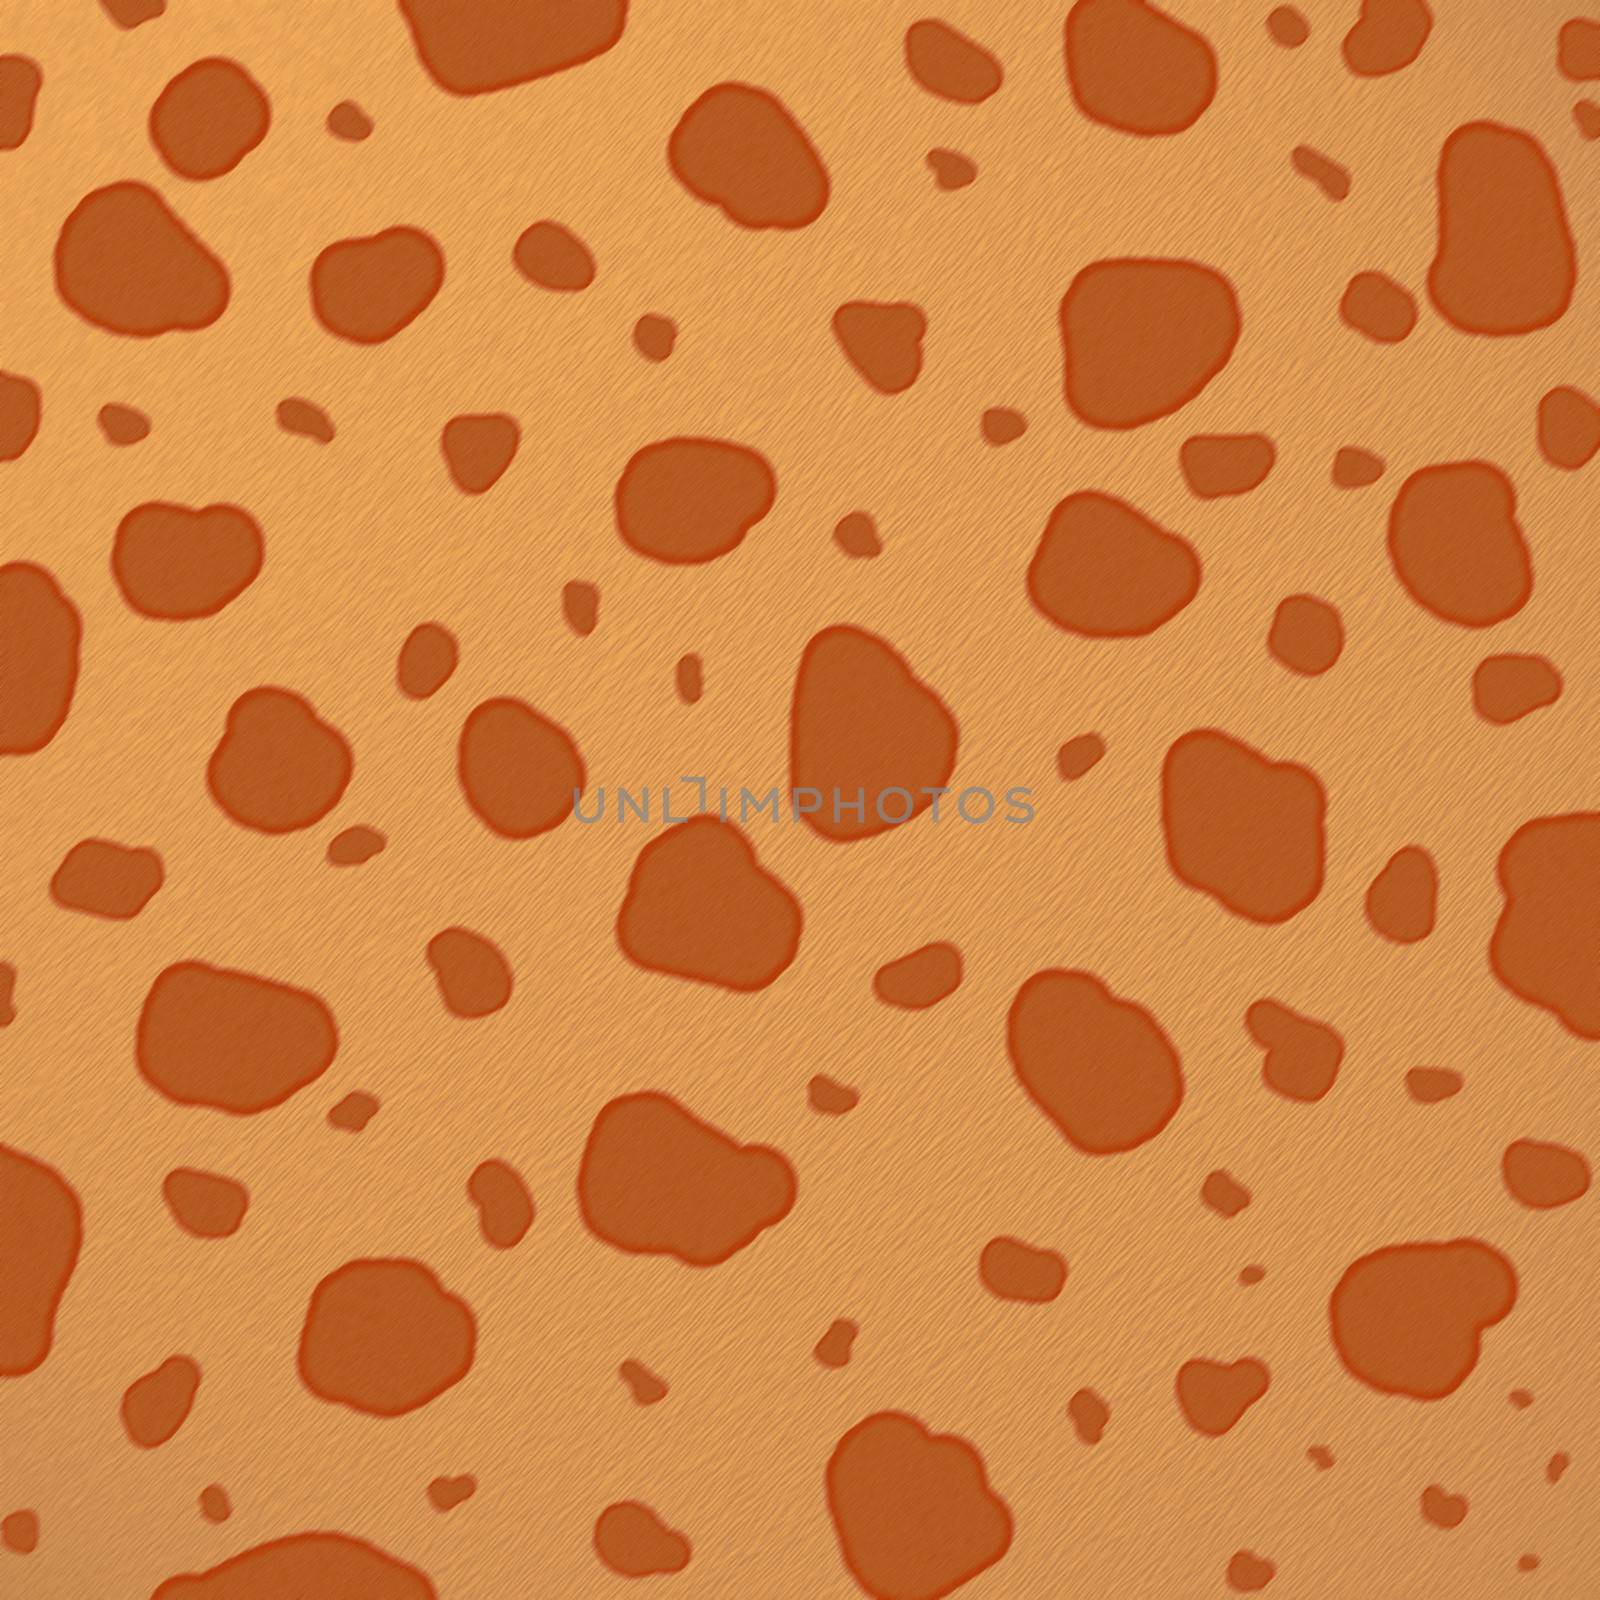 Animal skin texture background with fur and spot.